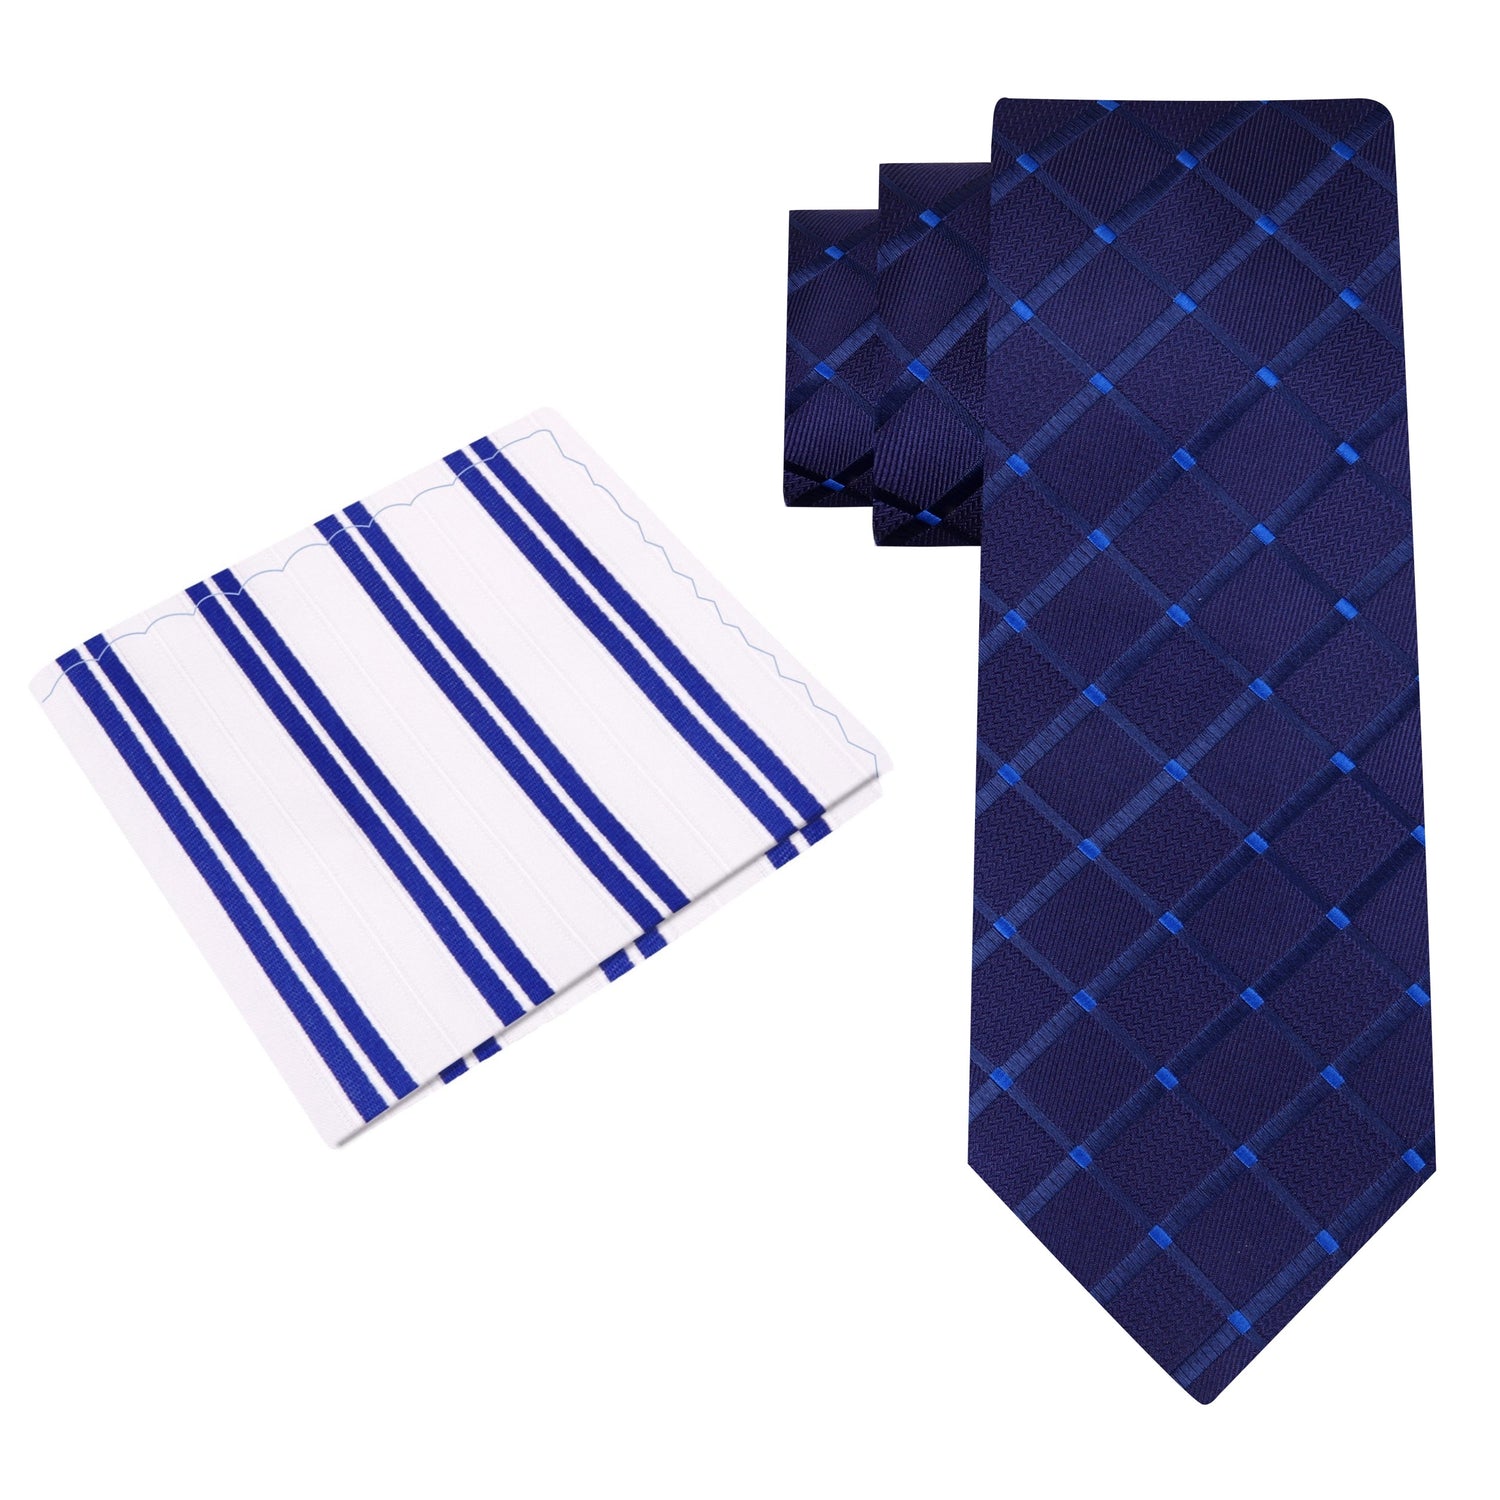 Alt View: Blue Necktie with a Geometric Texture and White Blue Stripe Square